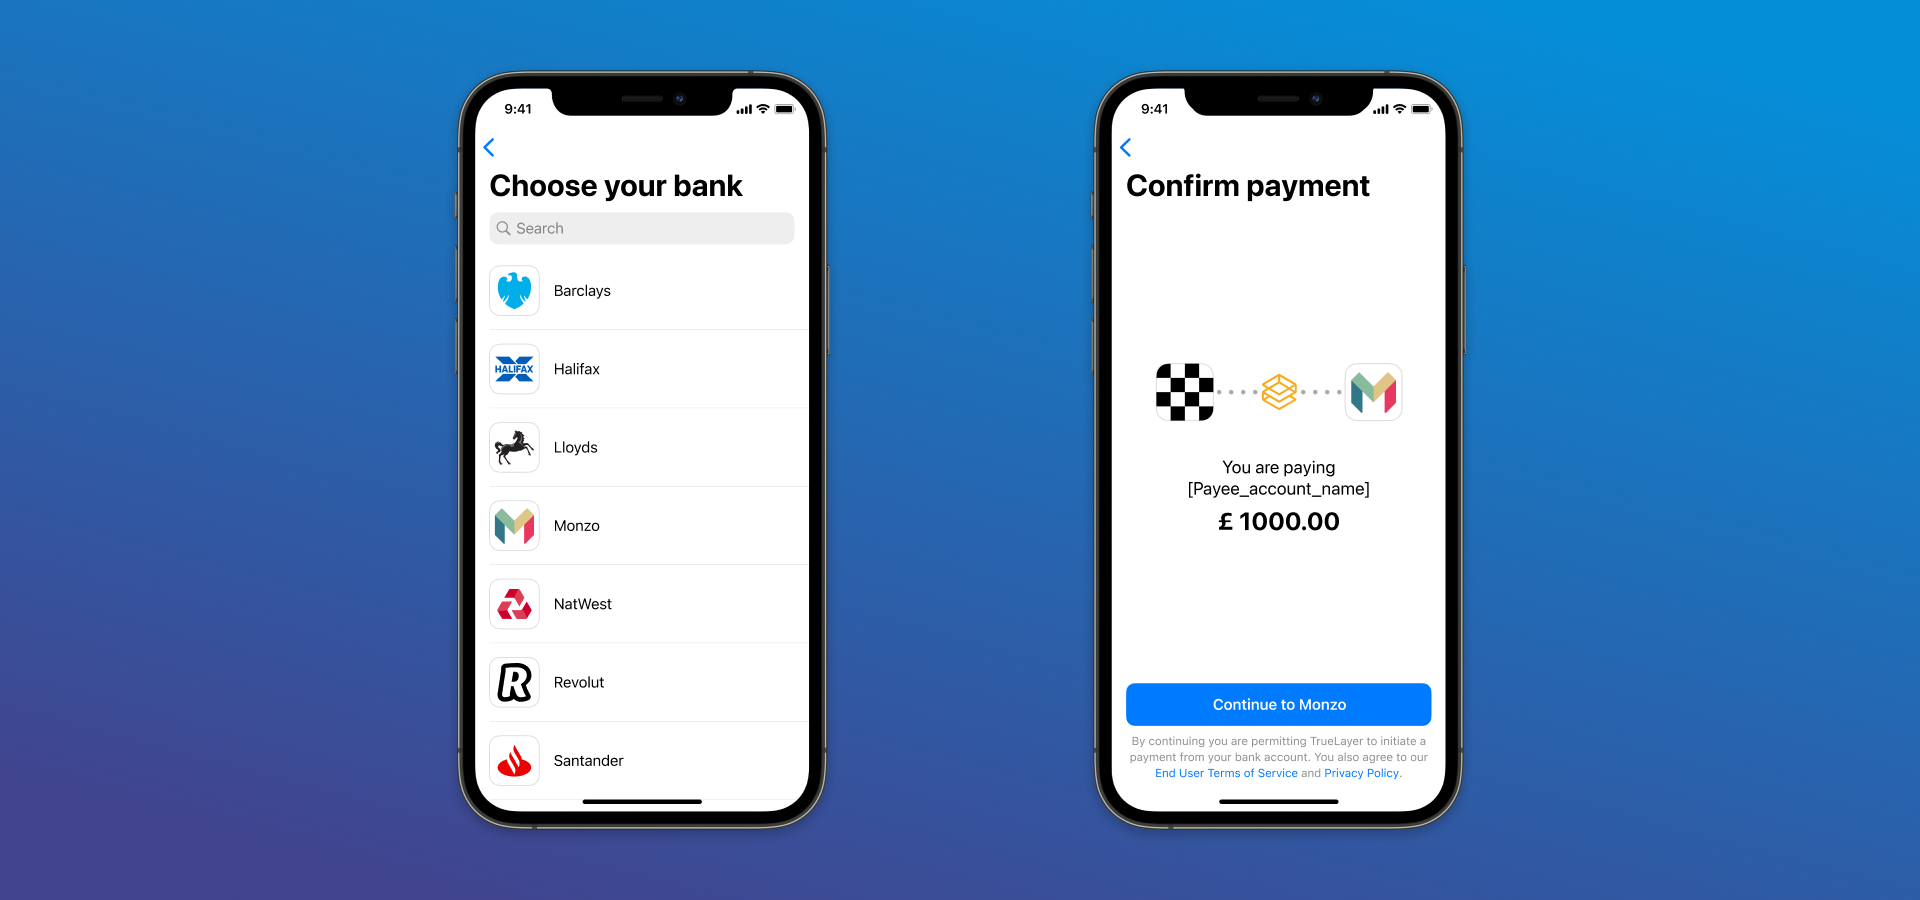 Image showing what the native screens look like on an iOS device. There are two screenshots in the image, one shows the bank selection screen and the other shows the payment confirmation screen.